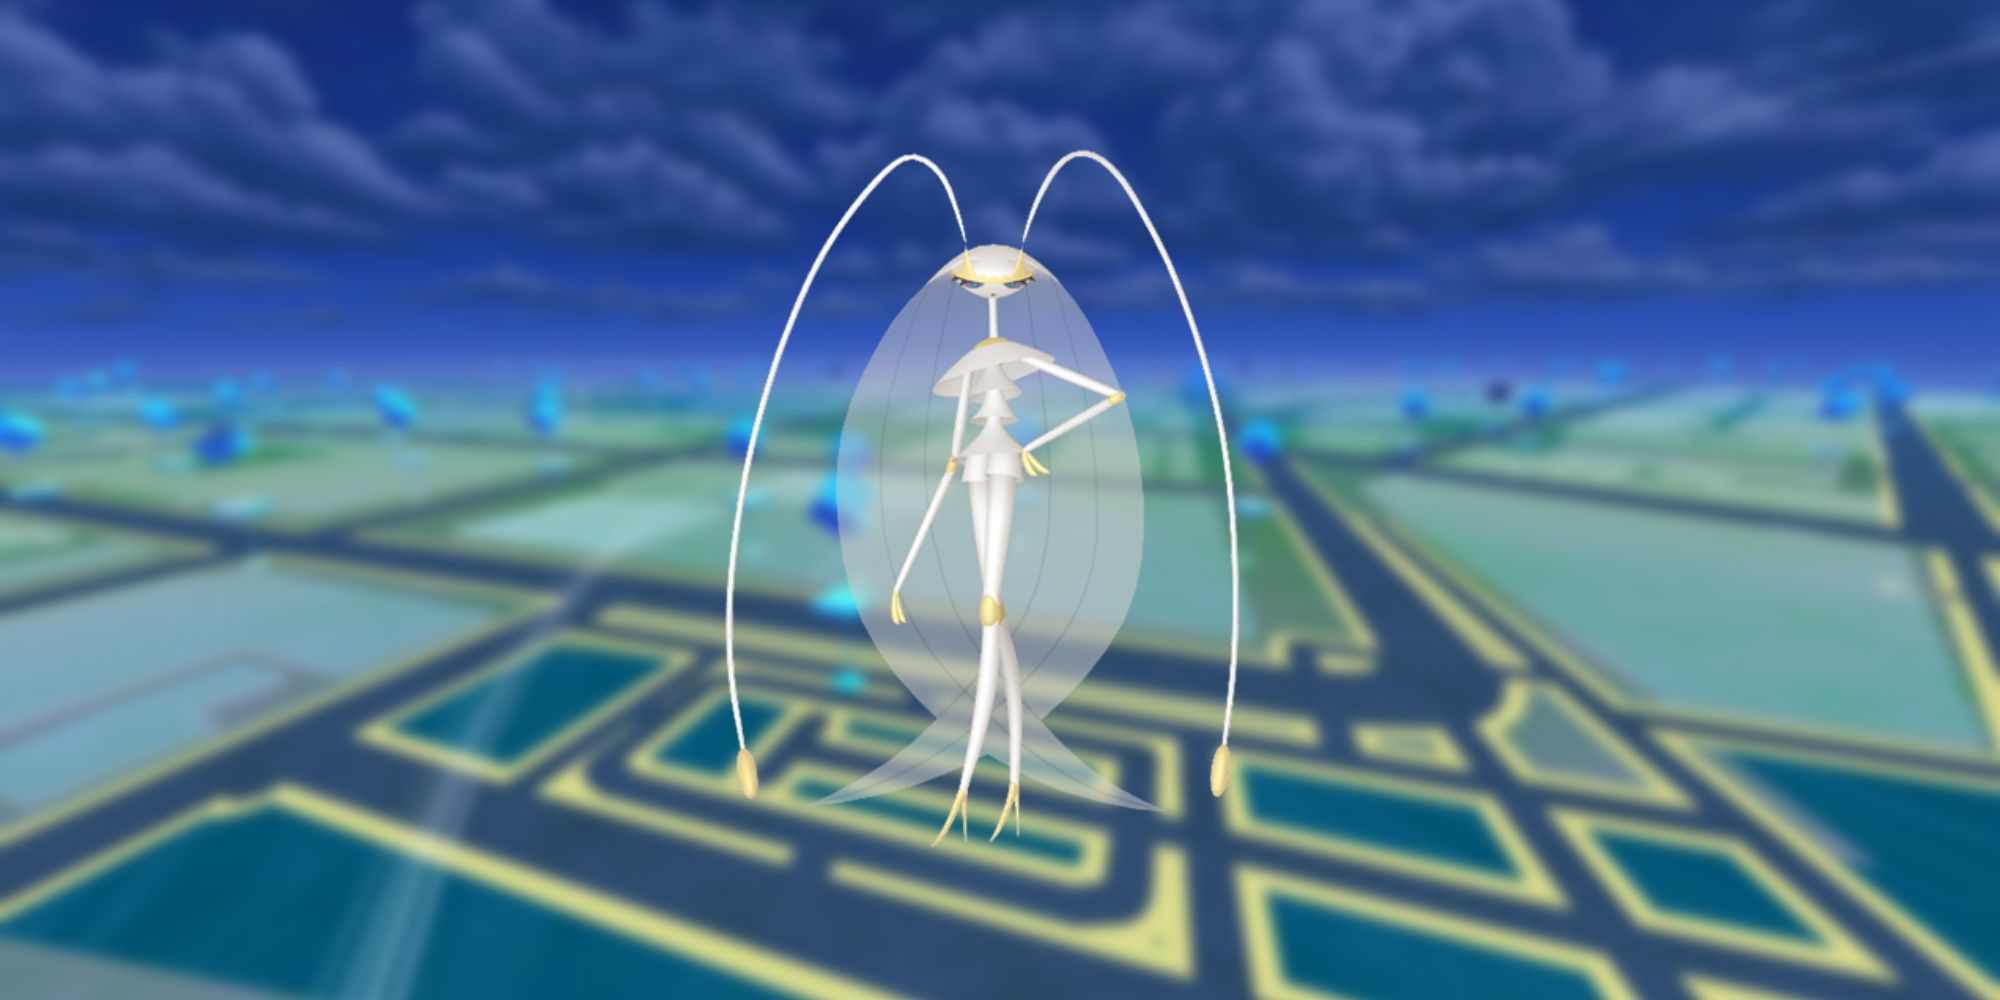 Pheromosa from Pokemon with the Pokemon Go map as the background